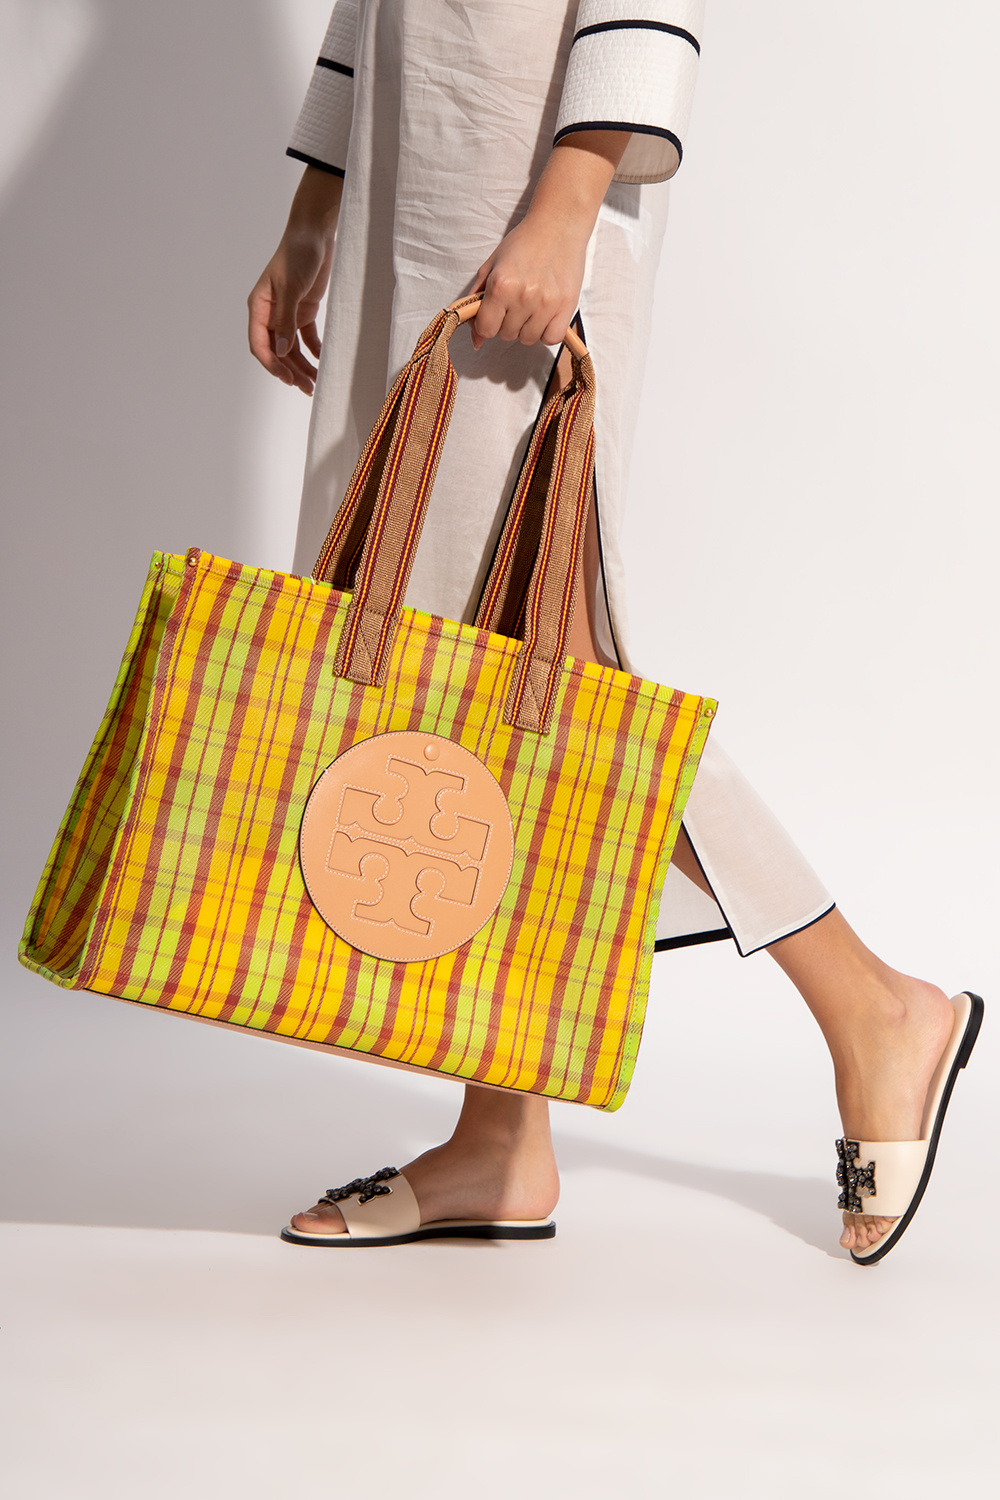 IetpShops Germany - 'Ella Mesh Market' shopper bag Tory Burch - One pocket  with tightening strap at the front of the bag